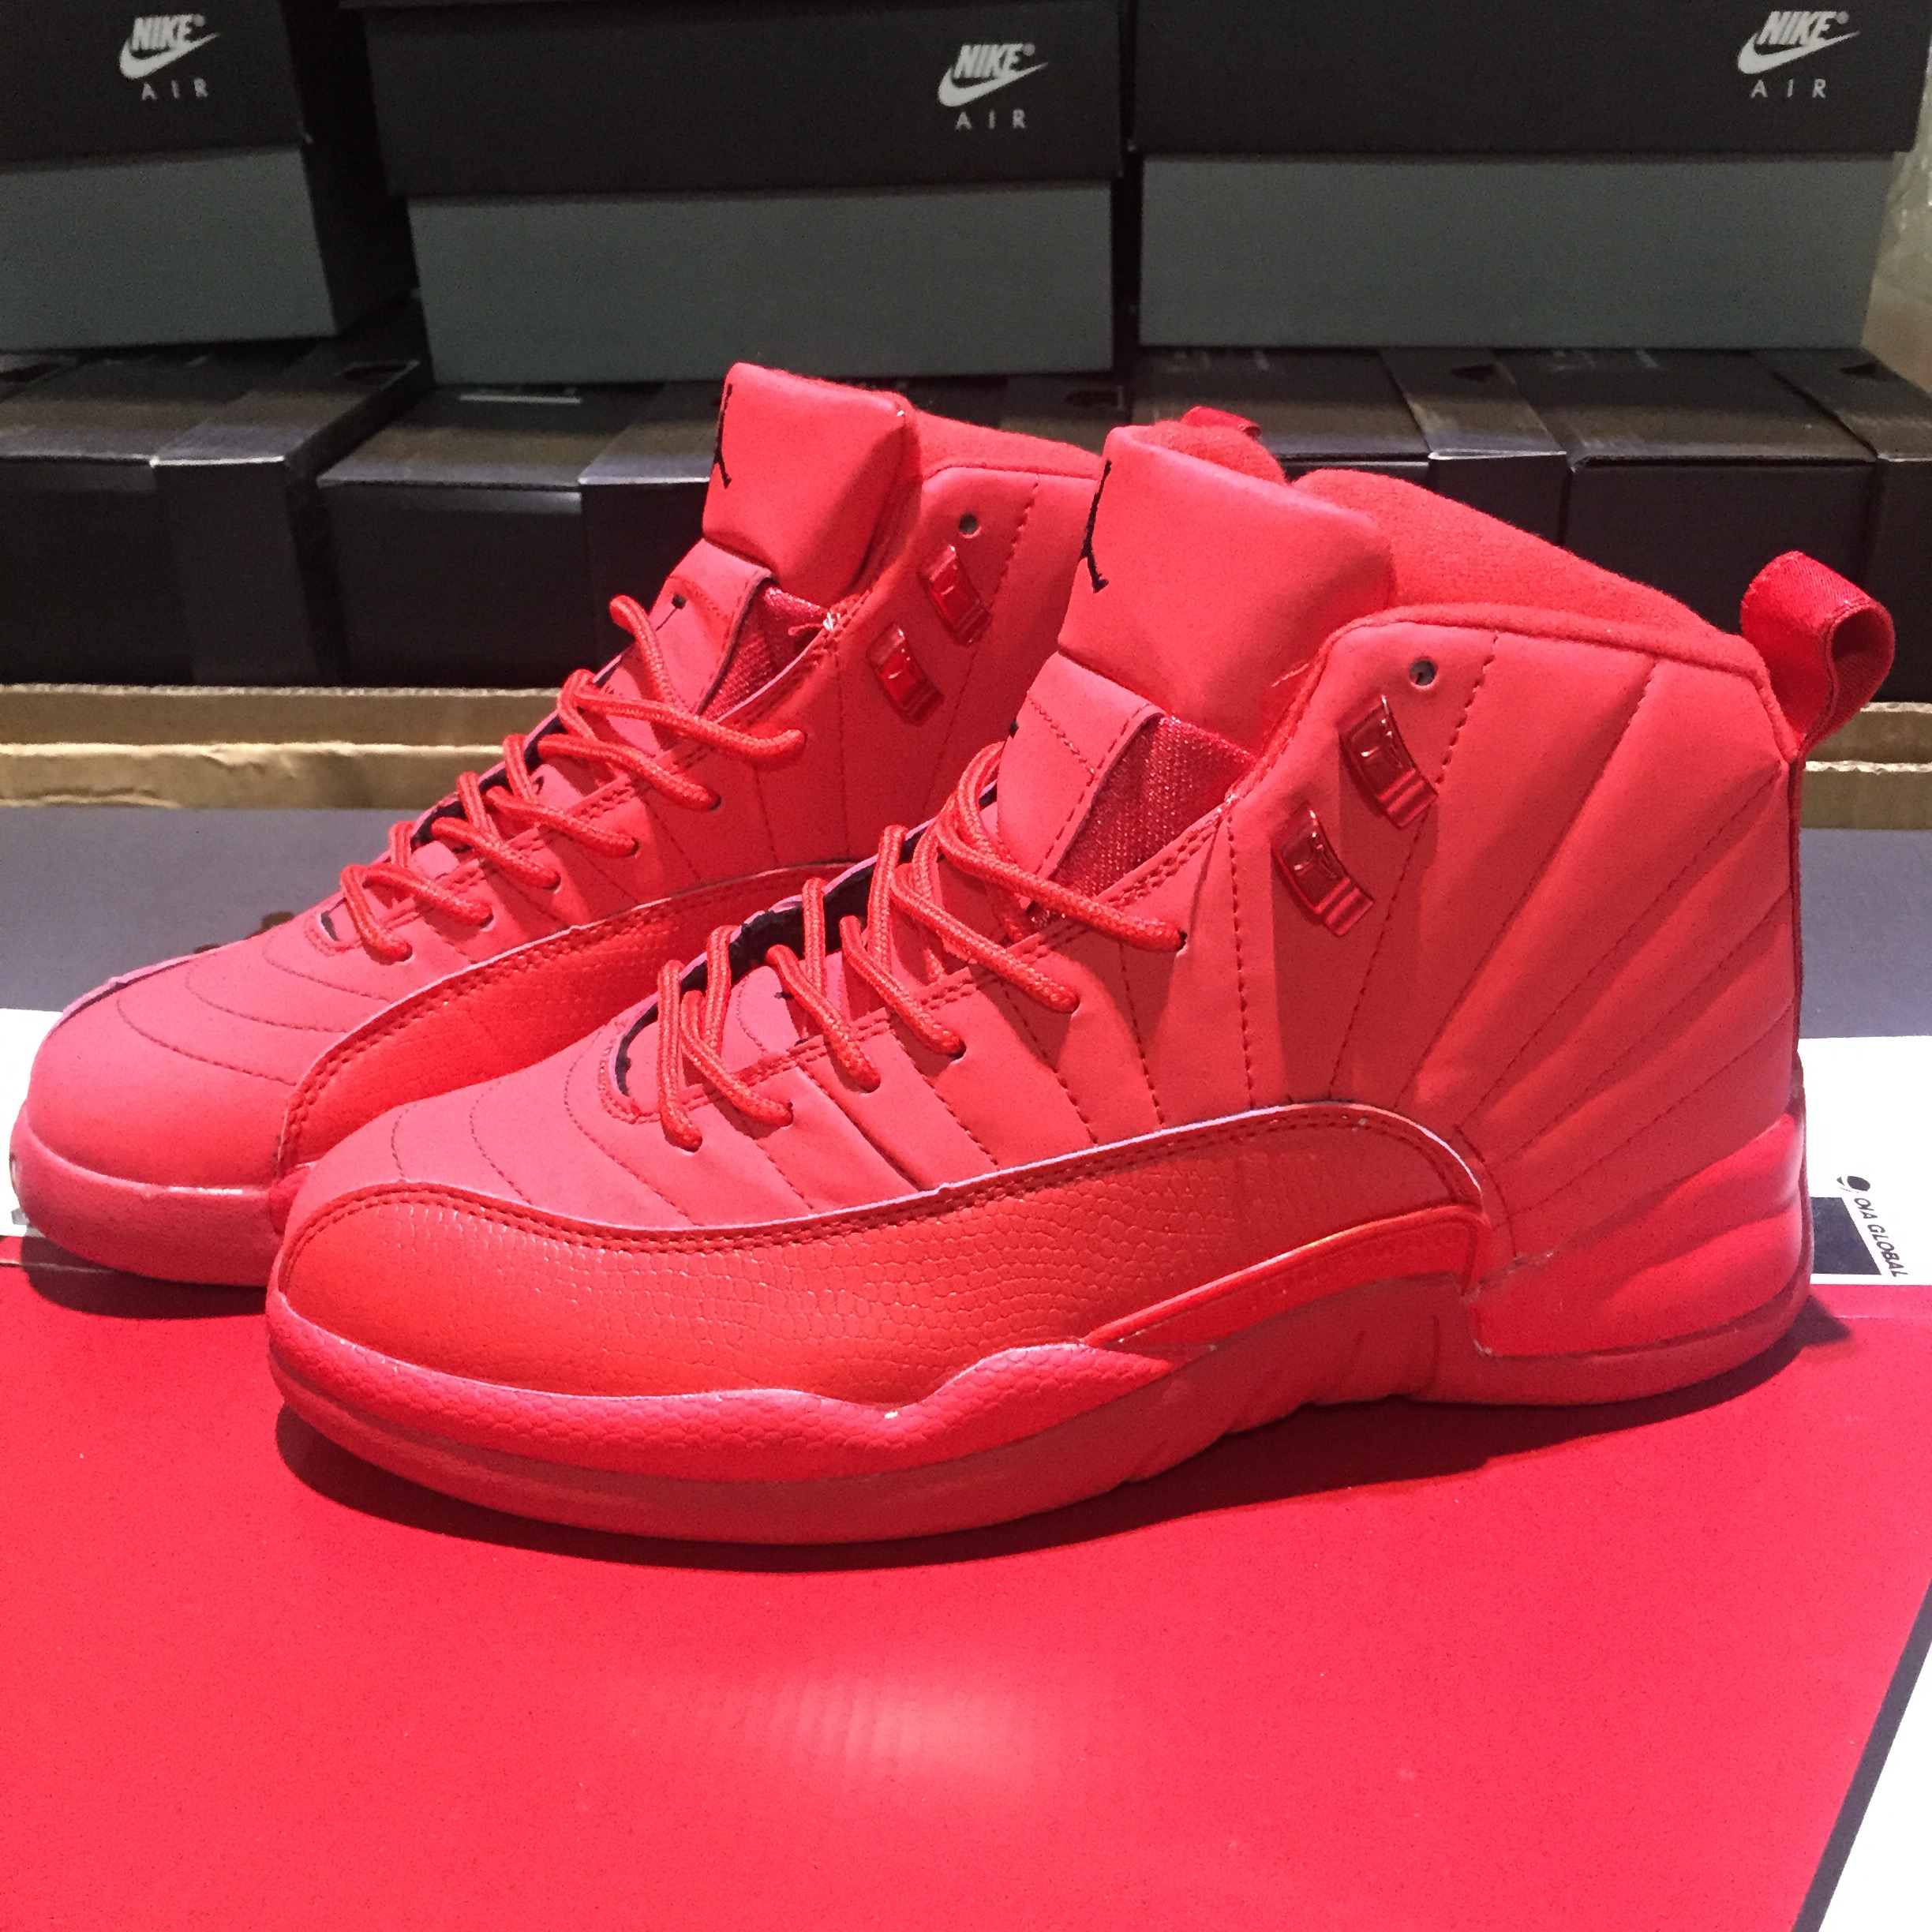 2018 Air Jordan 12 All Red Shoes - Click Image to Close